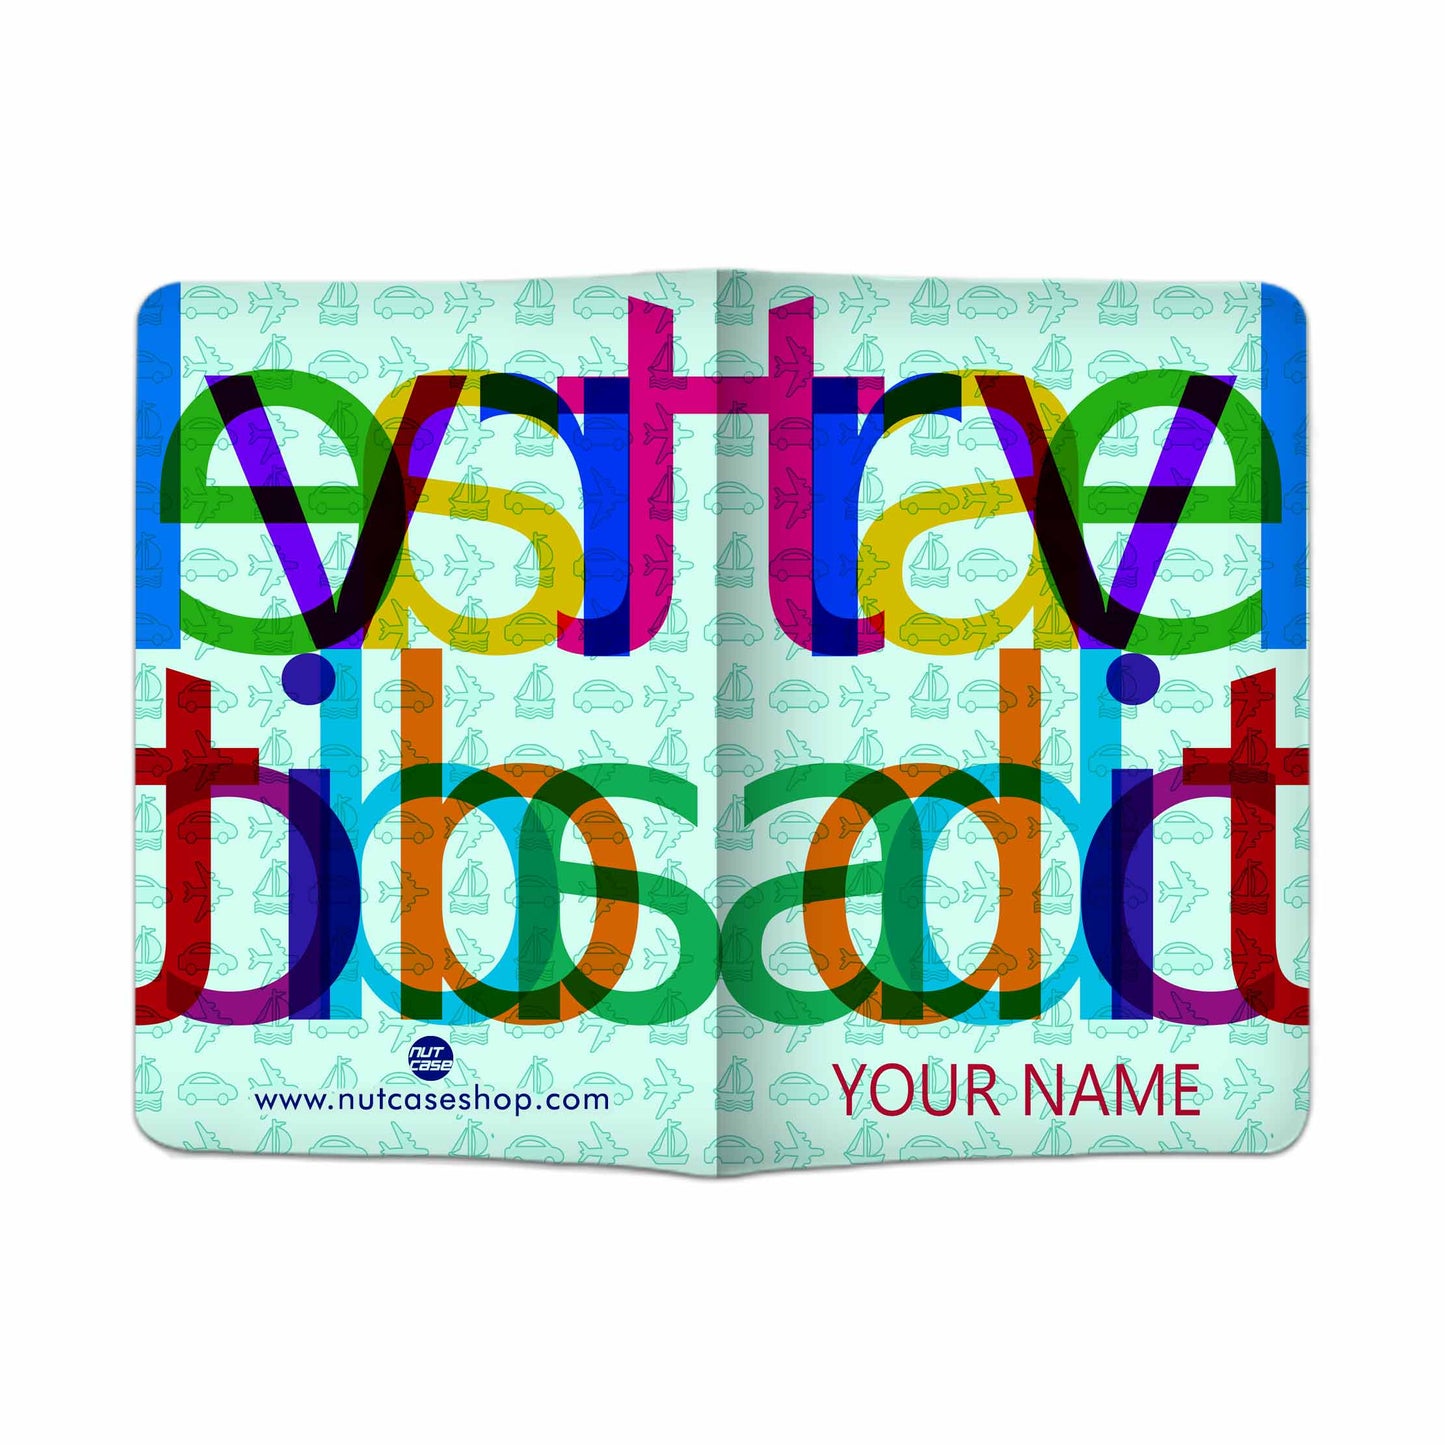 Personalised Passport Cover and Baggage Tag Combo - Travel Addit Nutcase